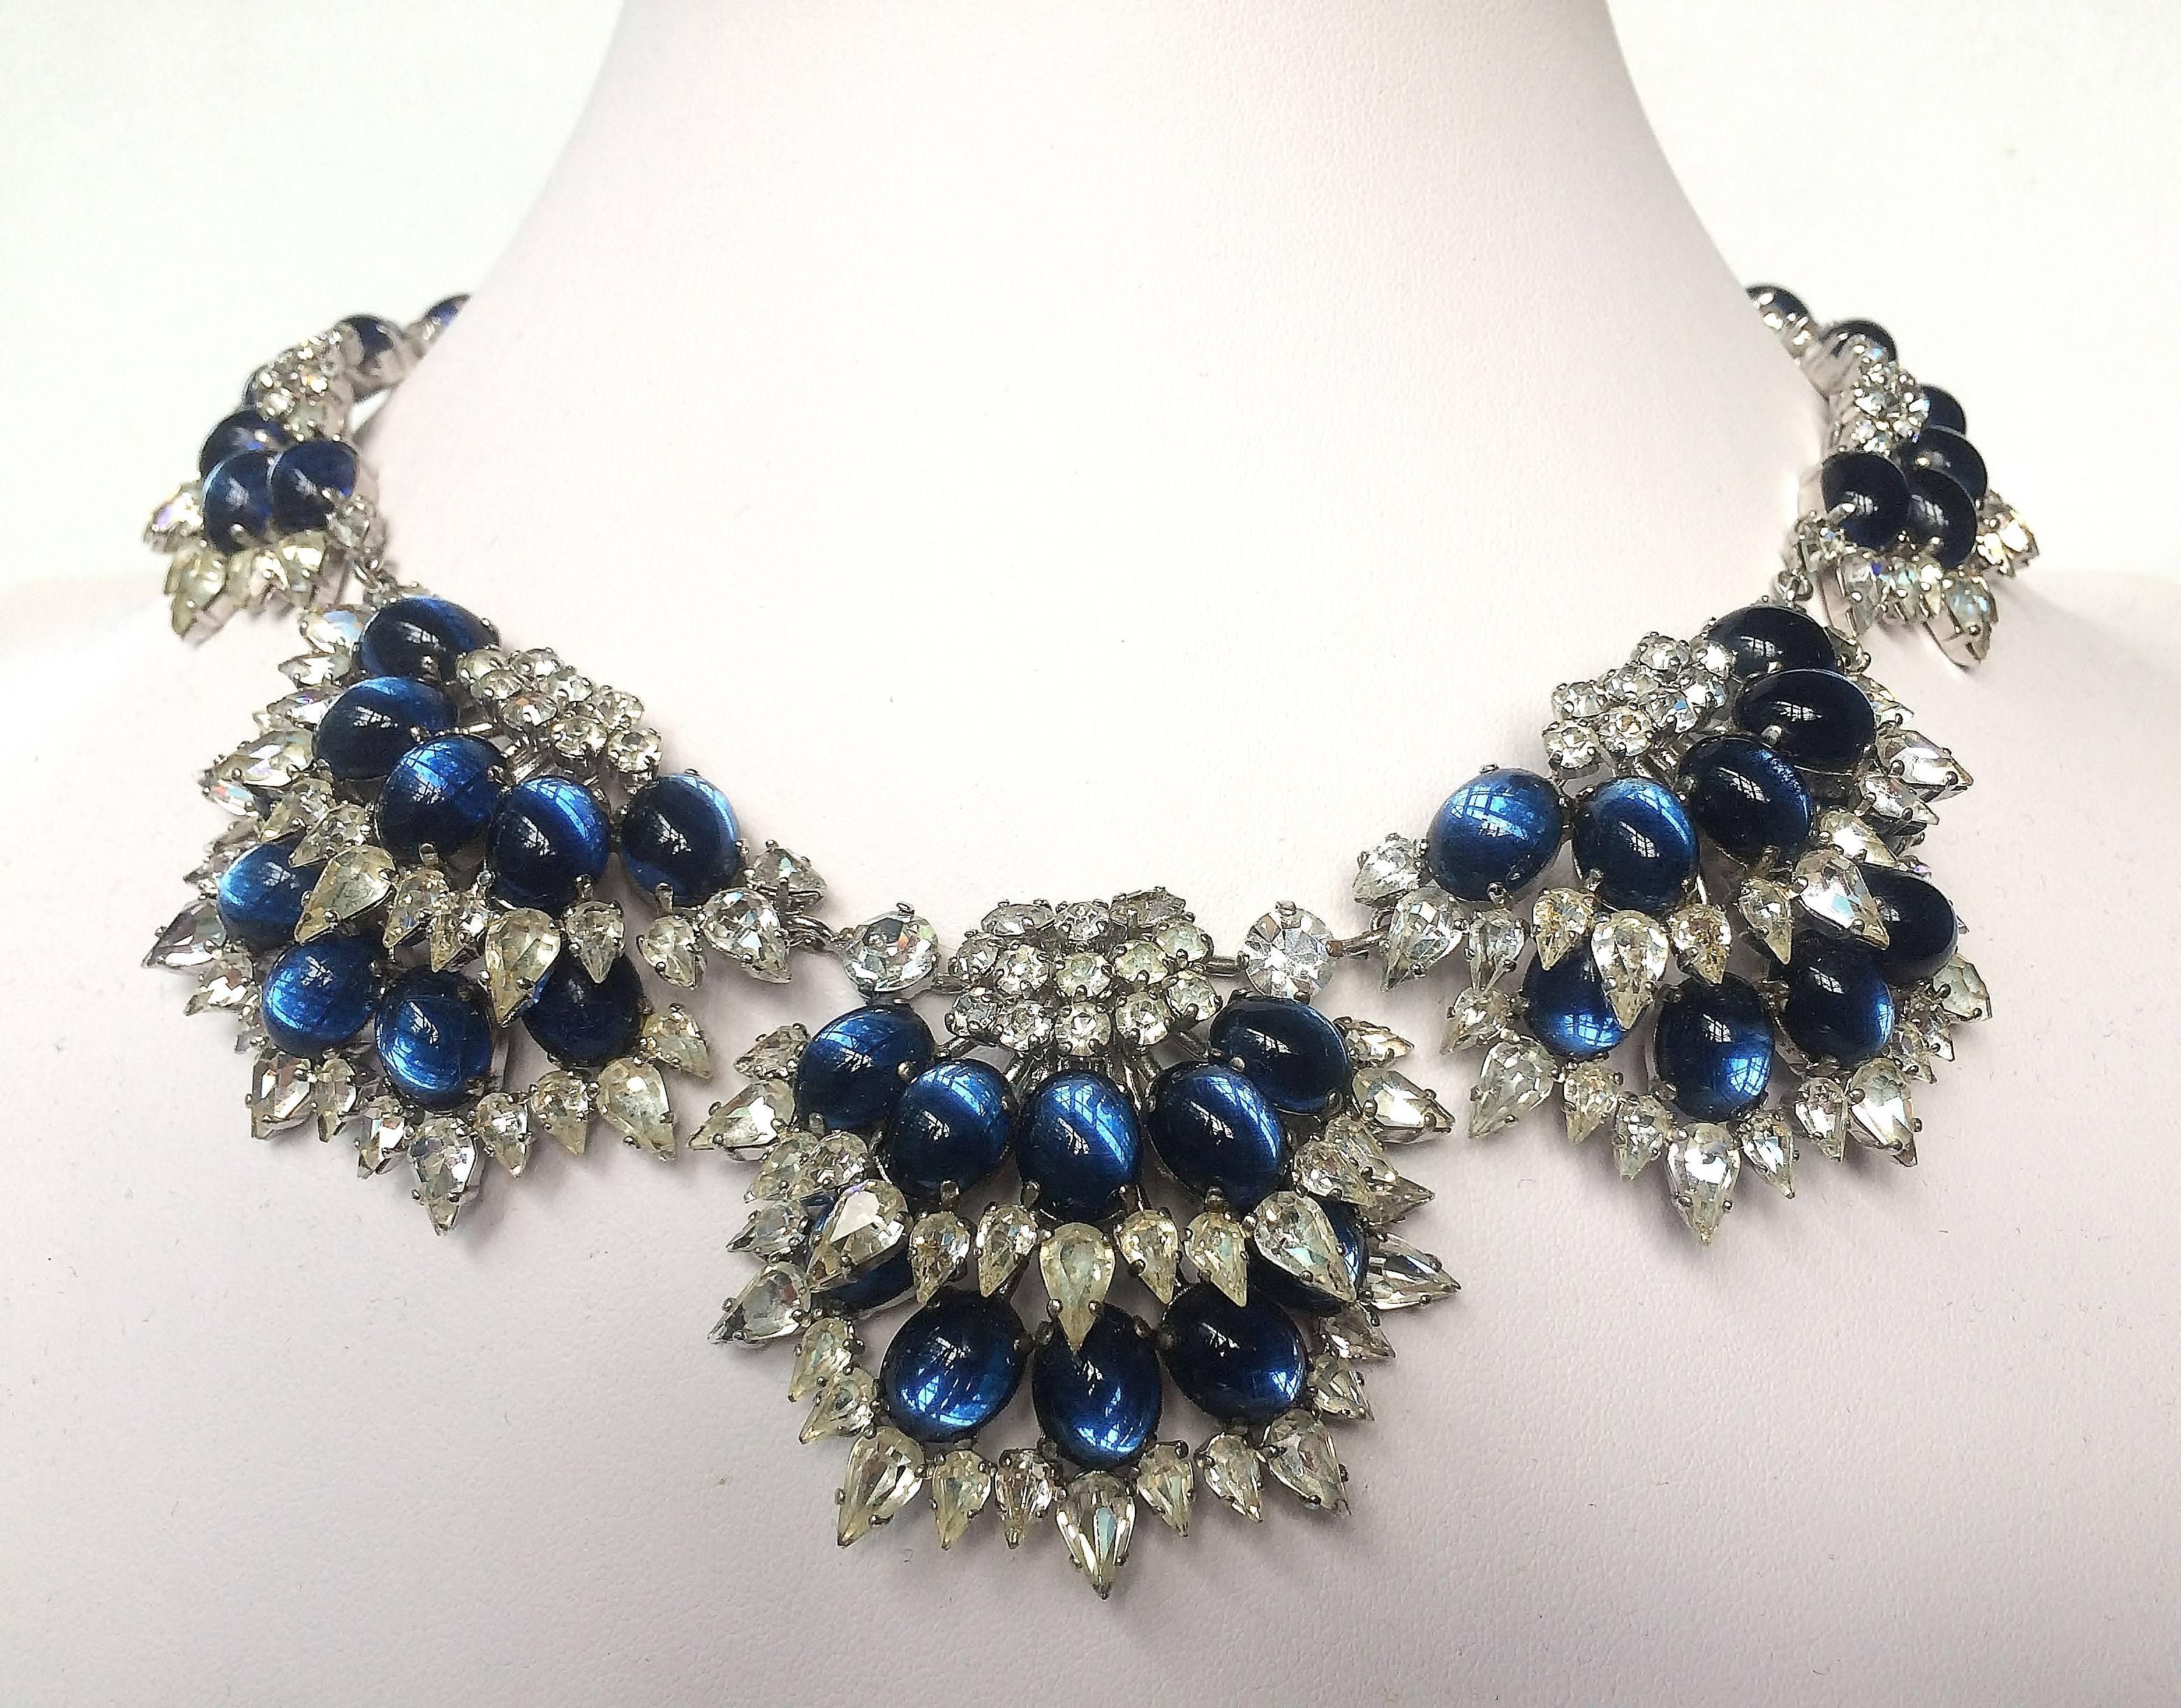 This stunning necklace, the epitomy of Dior glamour, made of many cuts and shapes of paste, including marquise and cabuchon, white and sapphire, which gives this rare necklace an incredible glow. The detailed metal is rhodium plated metal, with a